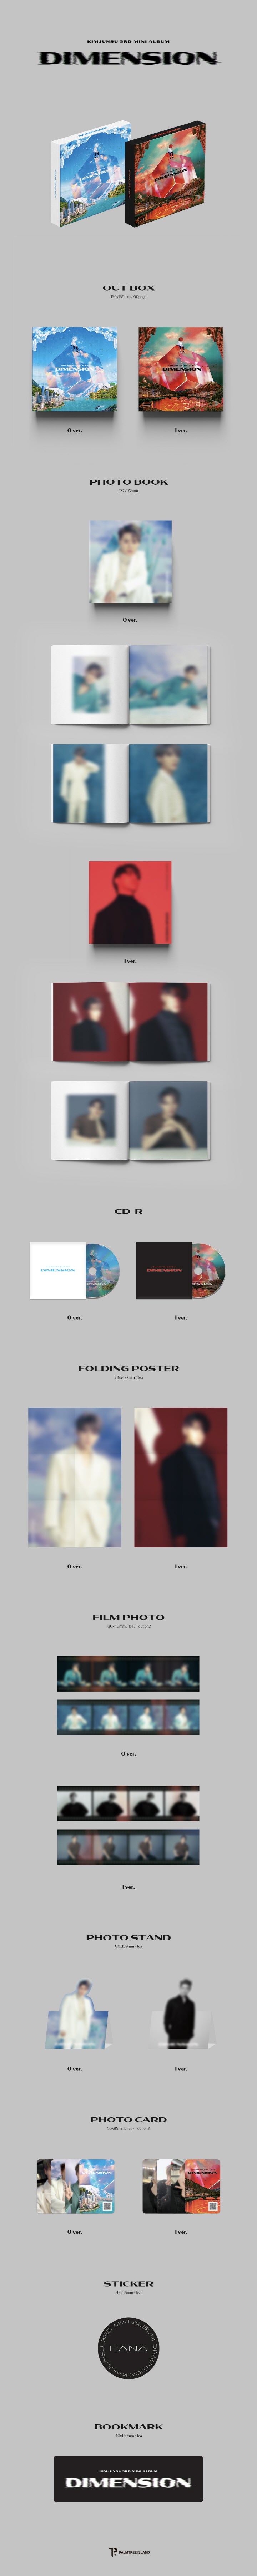 1 CD
1 Photo Book
1 Folded Poster
1 Film Photo (random out of 2 types)
1 Photo Stand
1 Photo Card (random out of 3 types)
...